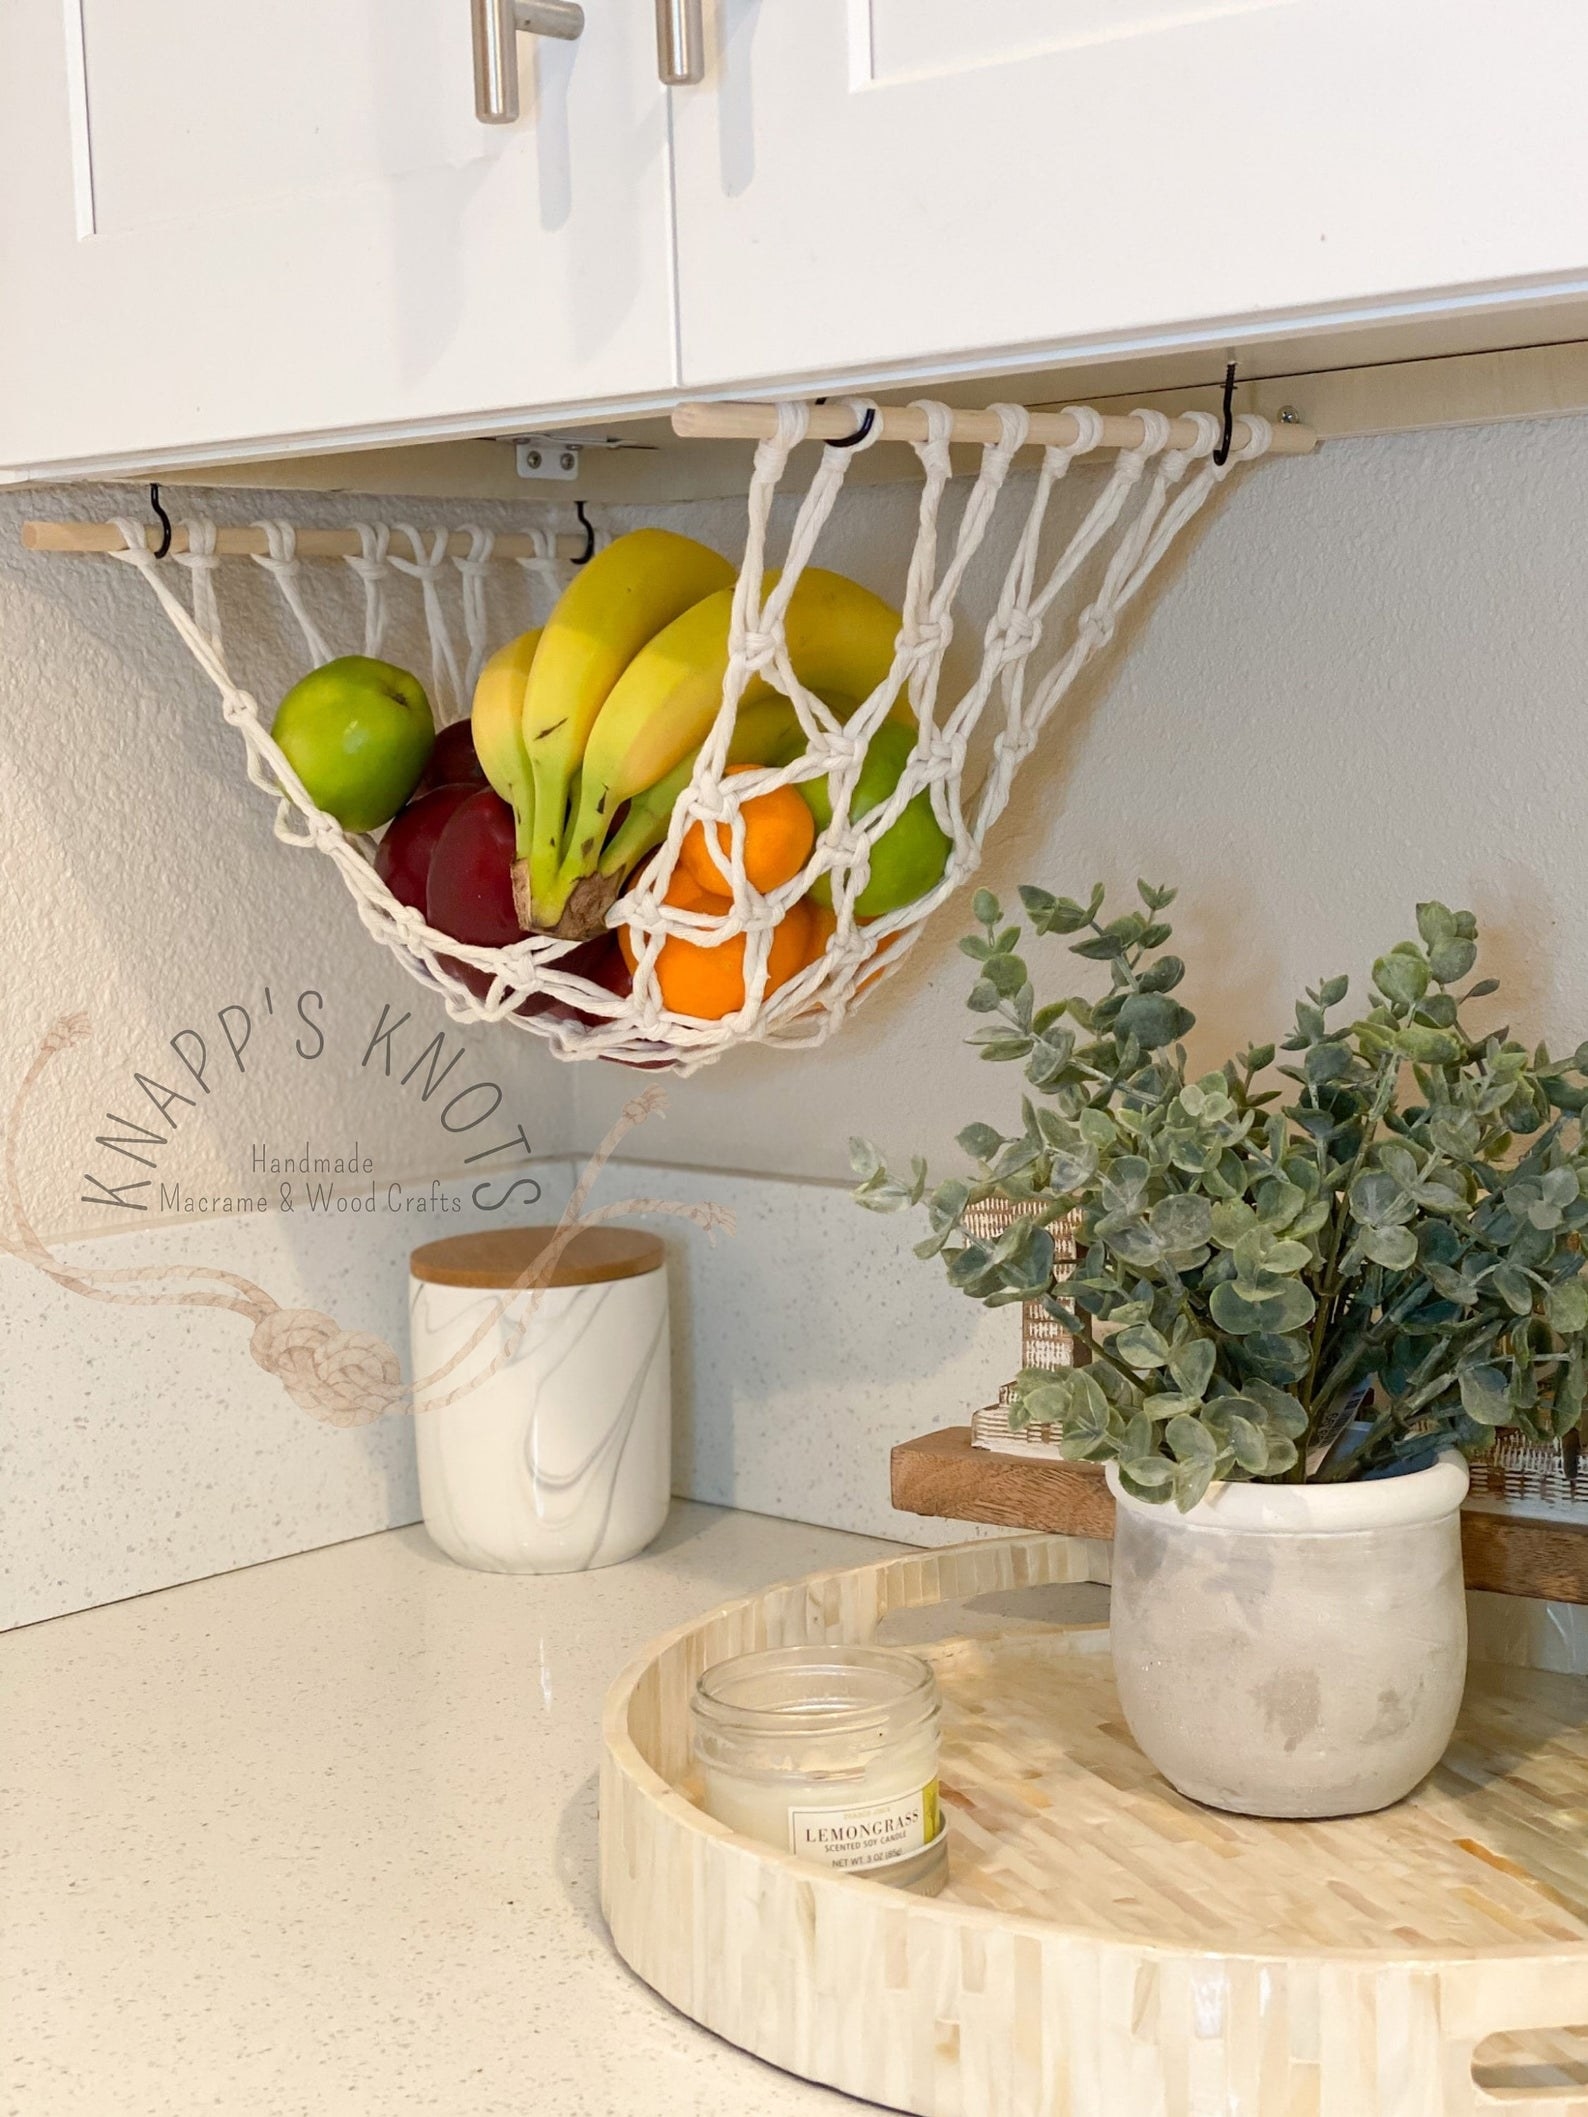 34 Products You Need If You Dream Of An Organized Kitchen